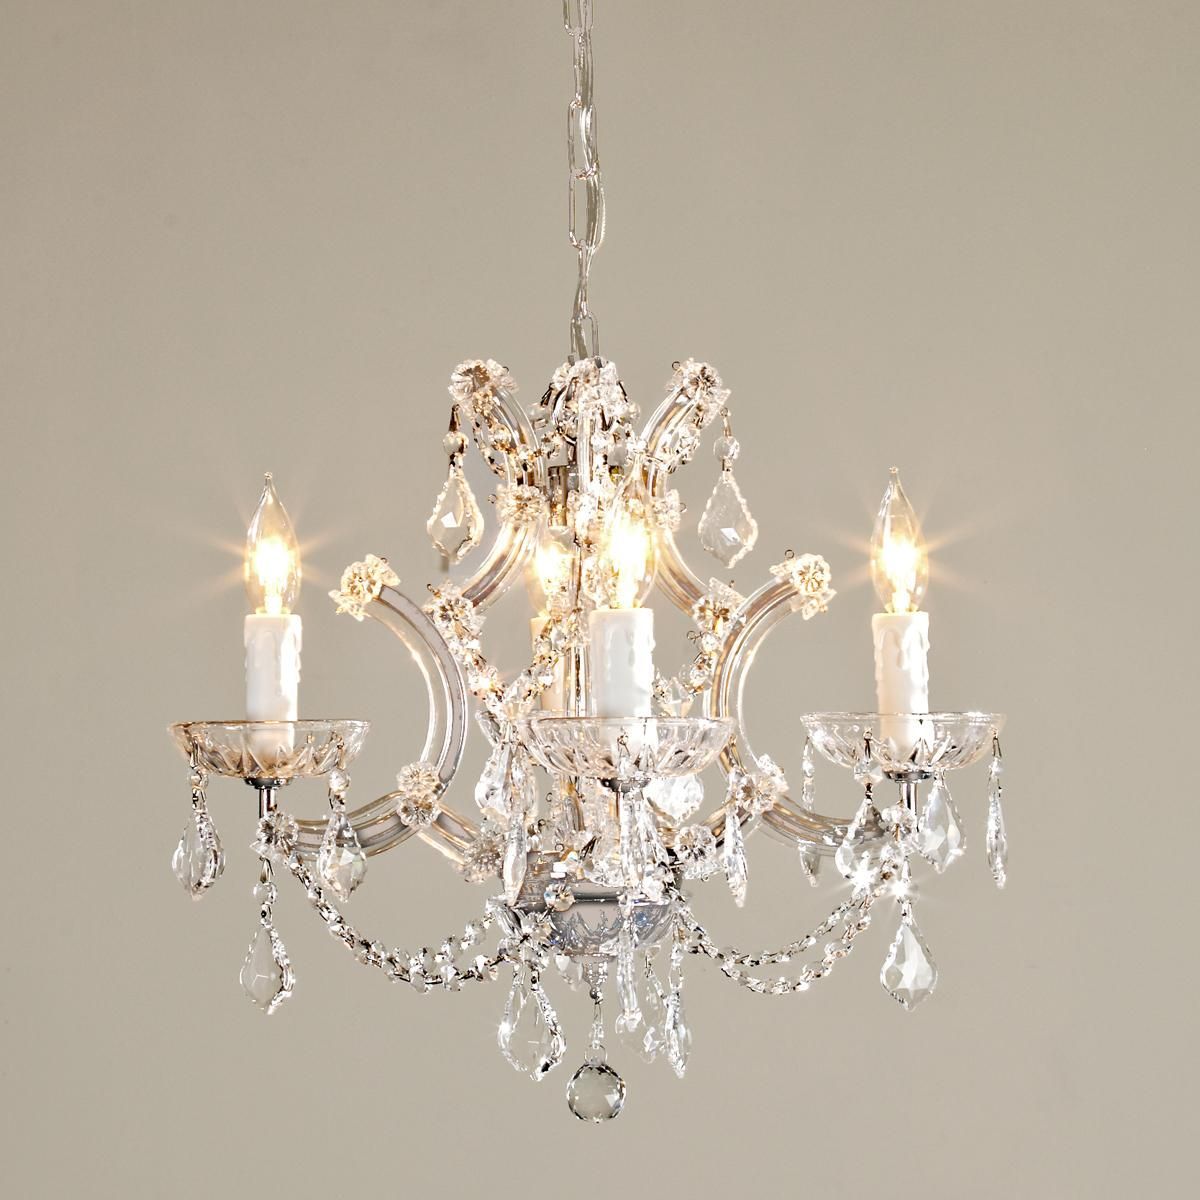 Round Crystal Chandelier | L&d Gerber | Chandelier Bedroom Intended For Blanchette 5 Light Candle Style Chandeliers (Photo 18 of 30)